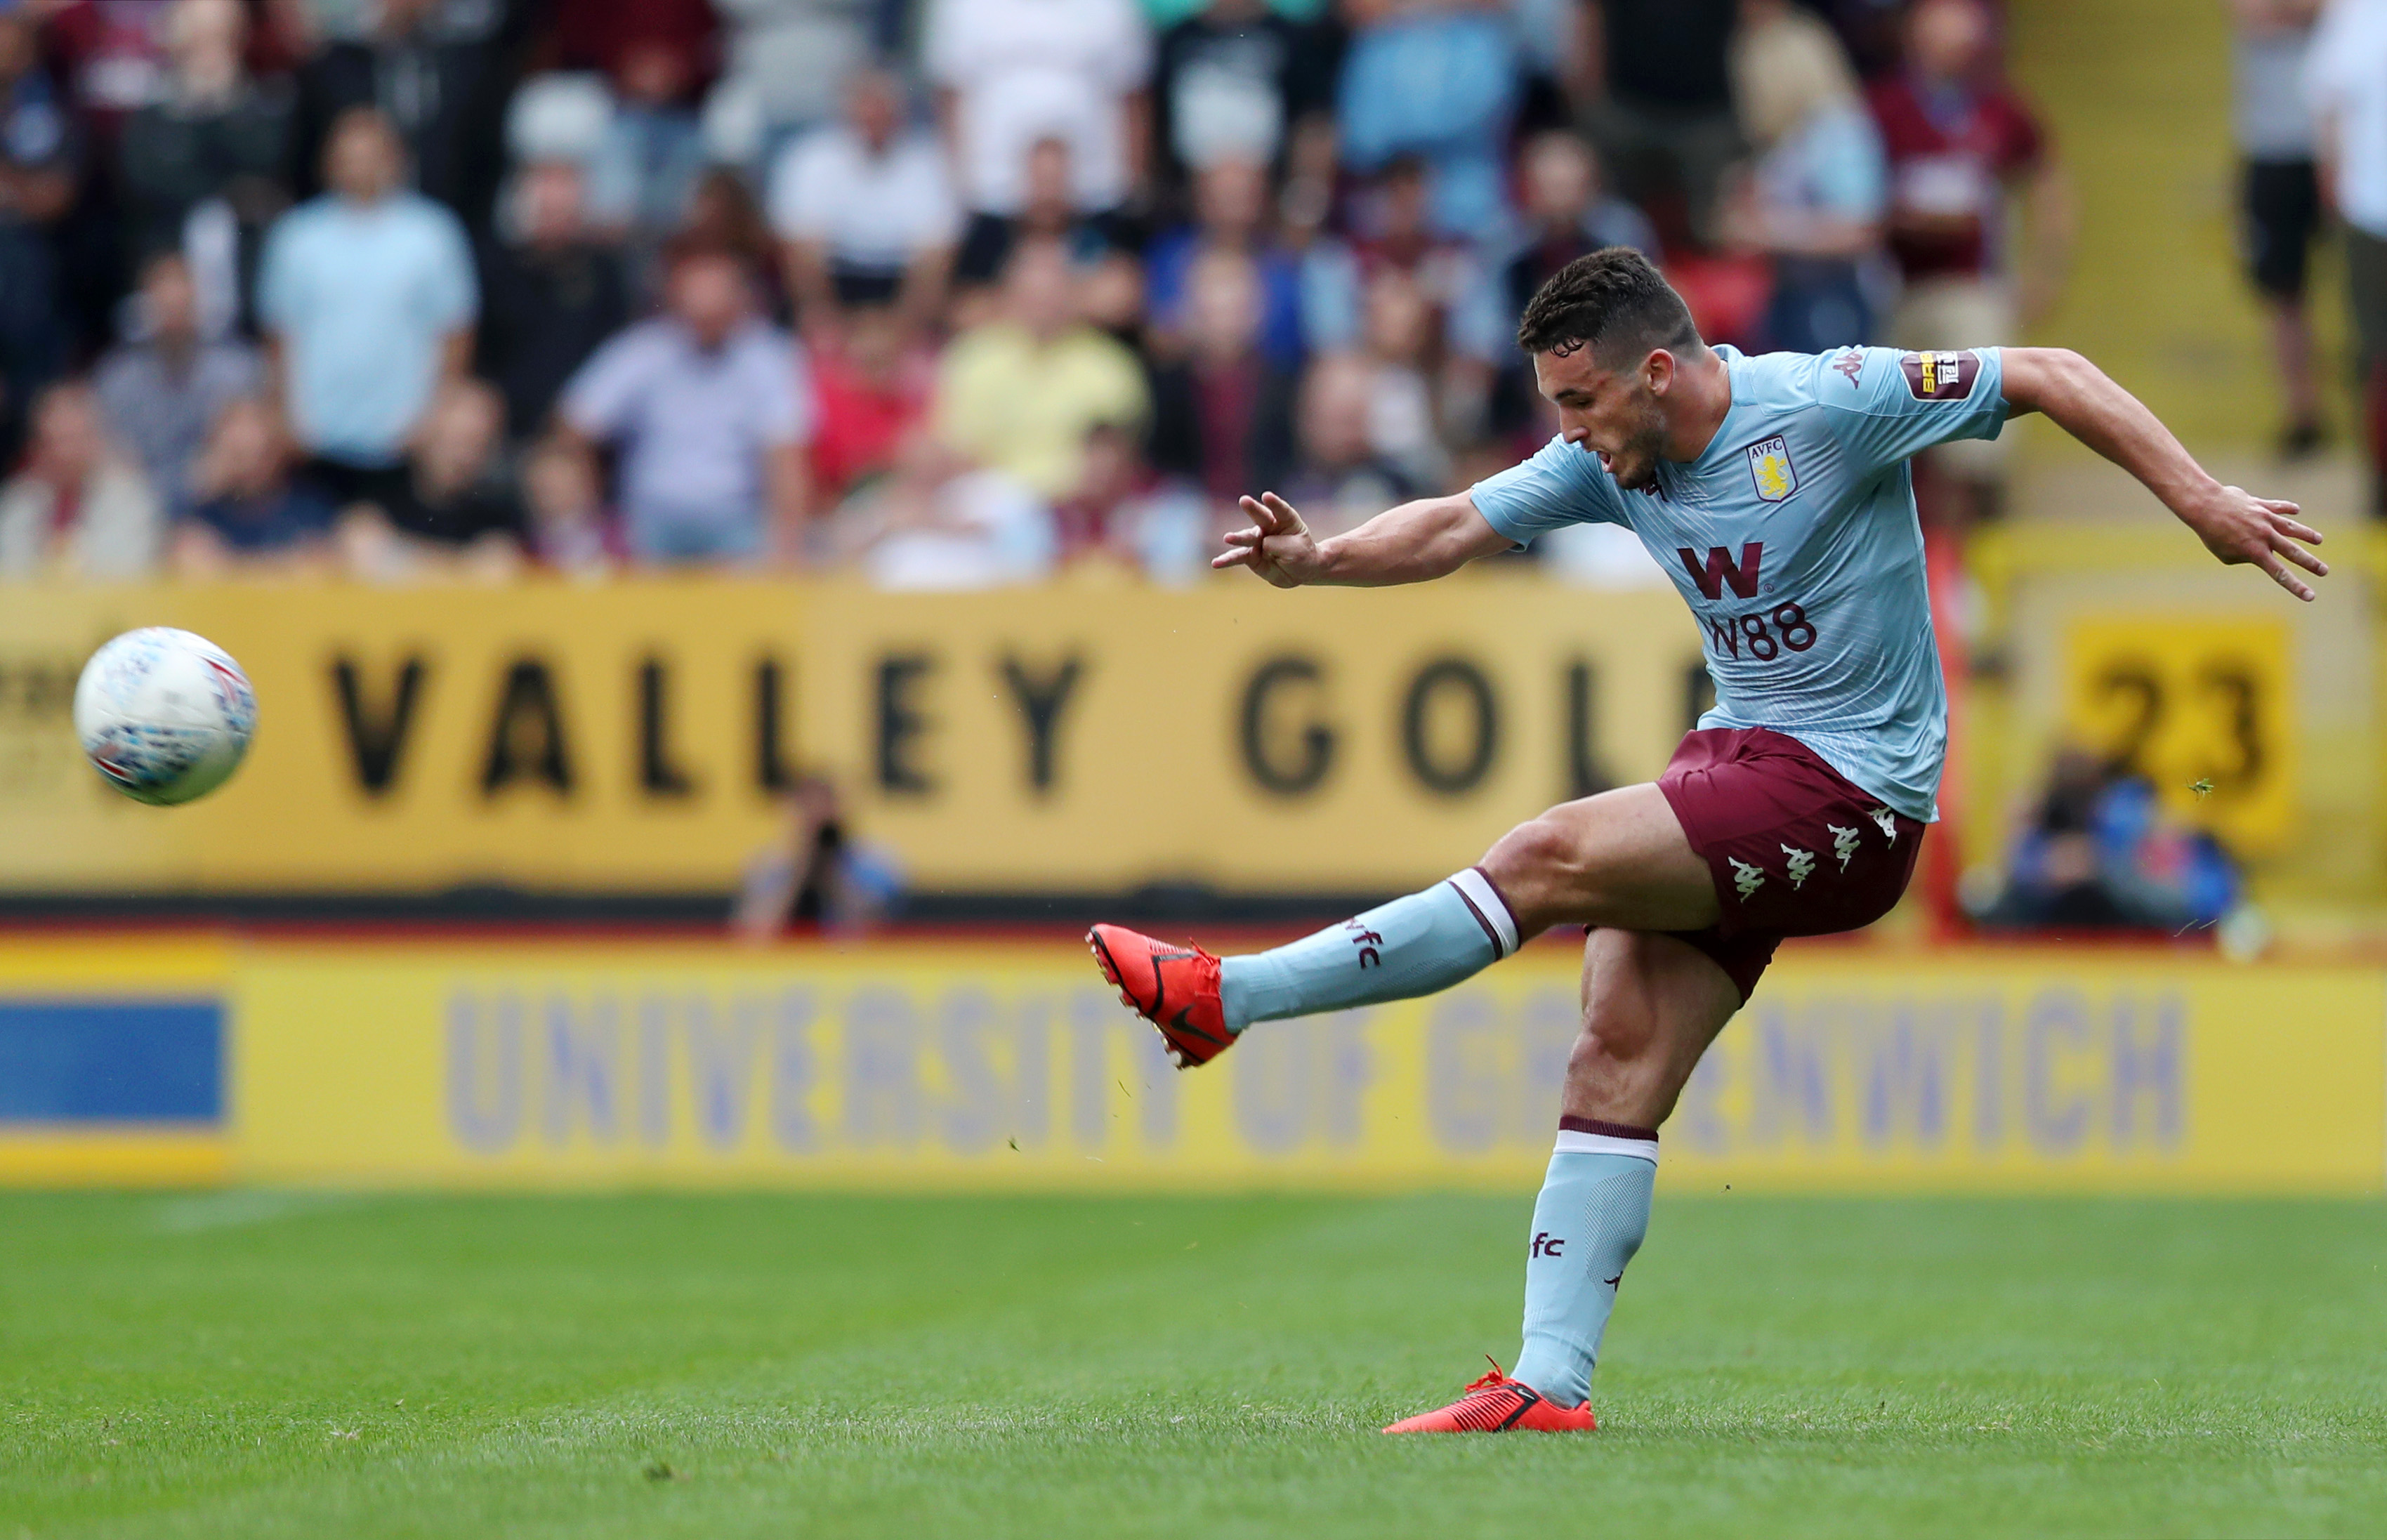 John McGinn has been linked with Manchester United in the past. (Photo by Naomi Baker/Getty Images)